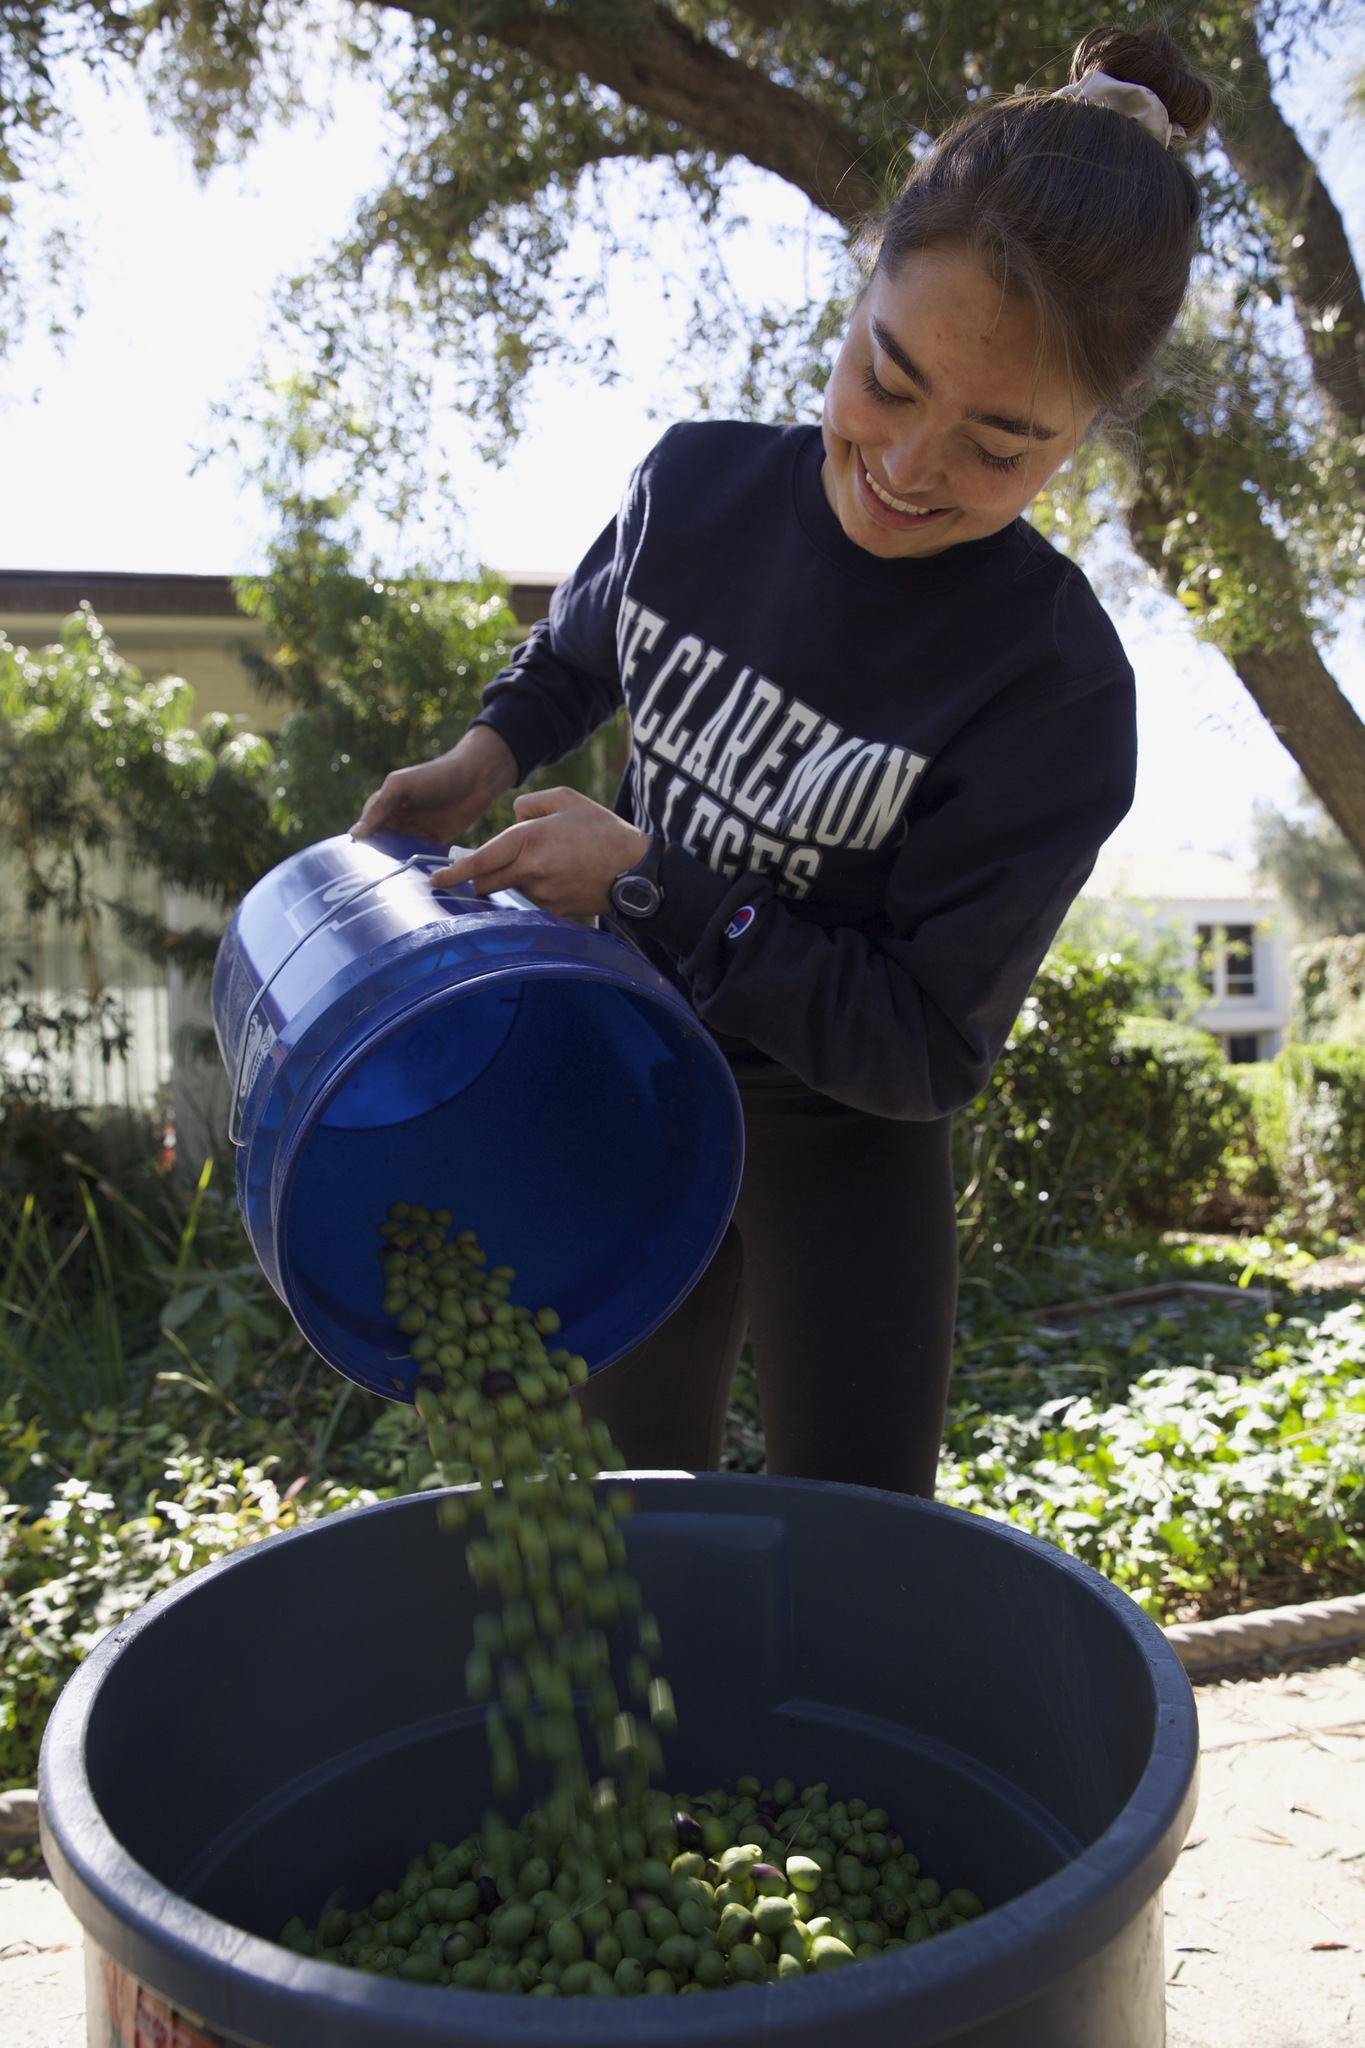 Student pouring harvested olives into a bin.